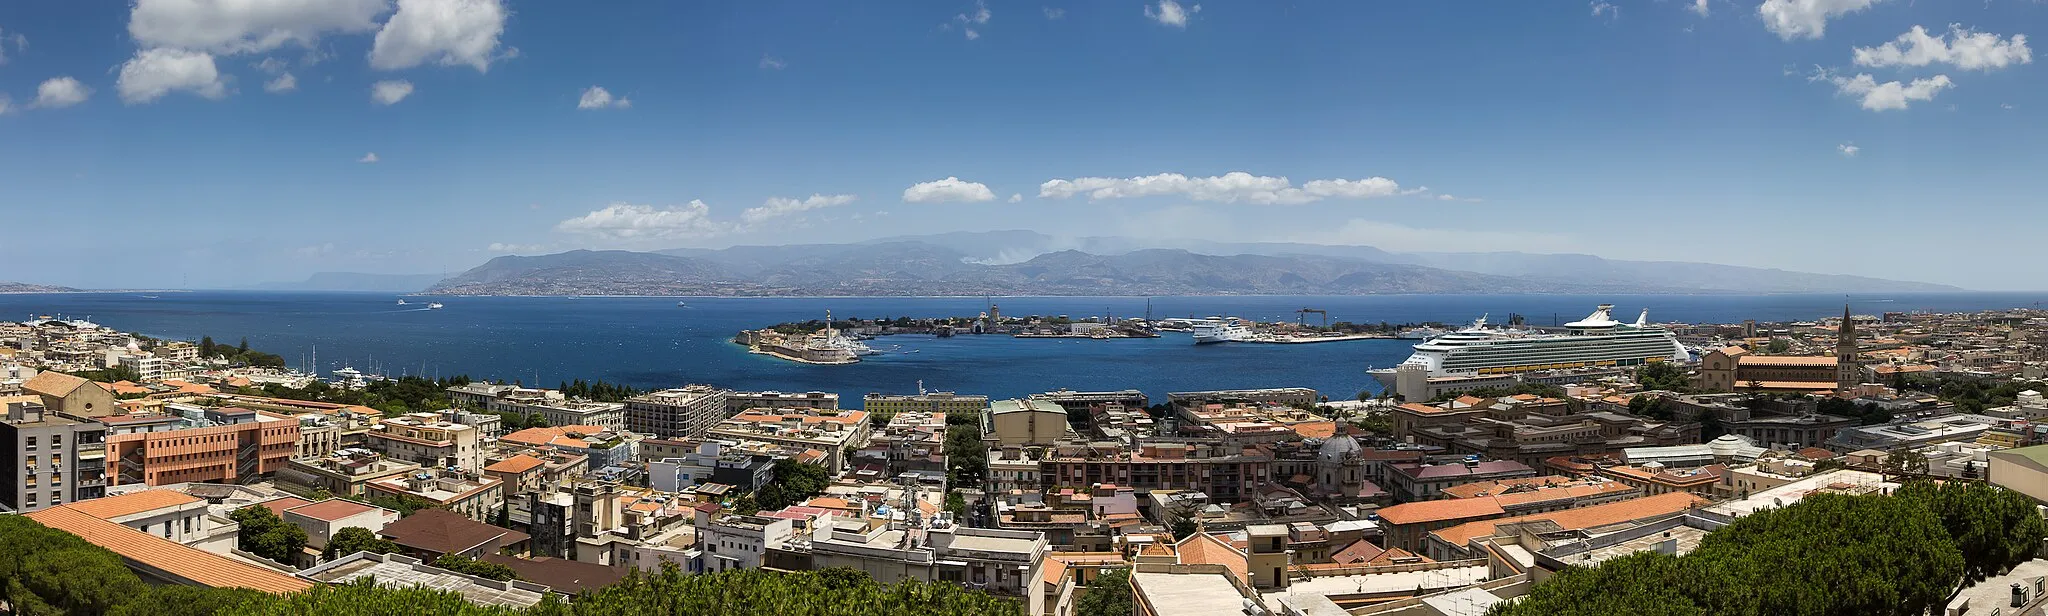 Photo showing: Messina Strait seen from Messina towards the Italian Mainland
Panorama 1/320sec at f/8 ISO 100 EF-S 15-85 f3.5-5.6 IS USM at 28mm
The Strait of Messina (Stretto di Messina in Italian, Strittu di Missina in Sicilian) is the narrow passage between the eastern tip of Sicily and the southern tip of Calabria in the south of Italy. It connects the Tyrrhenian Sea with the Ionian Sea, within the central Mediterranean. At its narrowest point, it measures 3.1 km (1.9 mi) in width, though near the town of Messina the width is some 5.1 km (3.2 mi) and maximum depth is 250 m (830 ft).
A ferry service connects Messina on Sicily with the mainland at Villa San Giovanni, which lies several kilometers north of the large city of Reggio Calabria; the ferries hold the cars (carriages) of the mainline train service between Palermo and Naples. There is also a hydrofoil service between Messina and Reggio Calabria.
The strait is characterized by strong tidal currents, that established a unique marine ecosystem. A natural whirlpool in the Northern portion of the strait has been linked to the Greek legend of Scylla and Charybdis. In some circumstances, the mirage of Fata Morgana can be observed when looking at Sicily from Calabria (Wikipedia)

Best view: press "L"